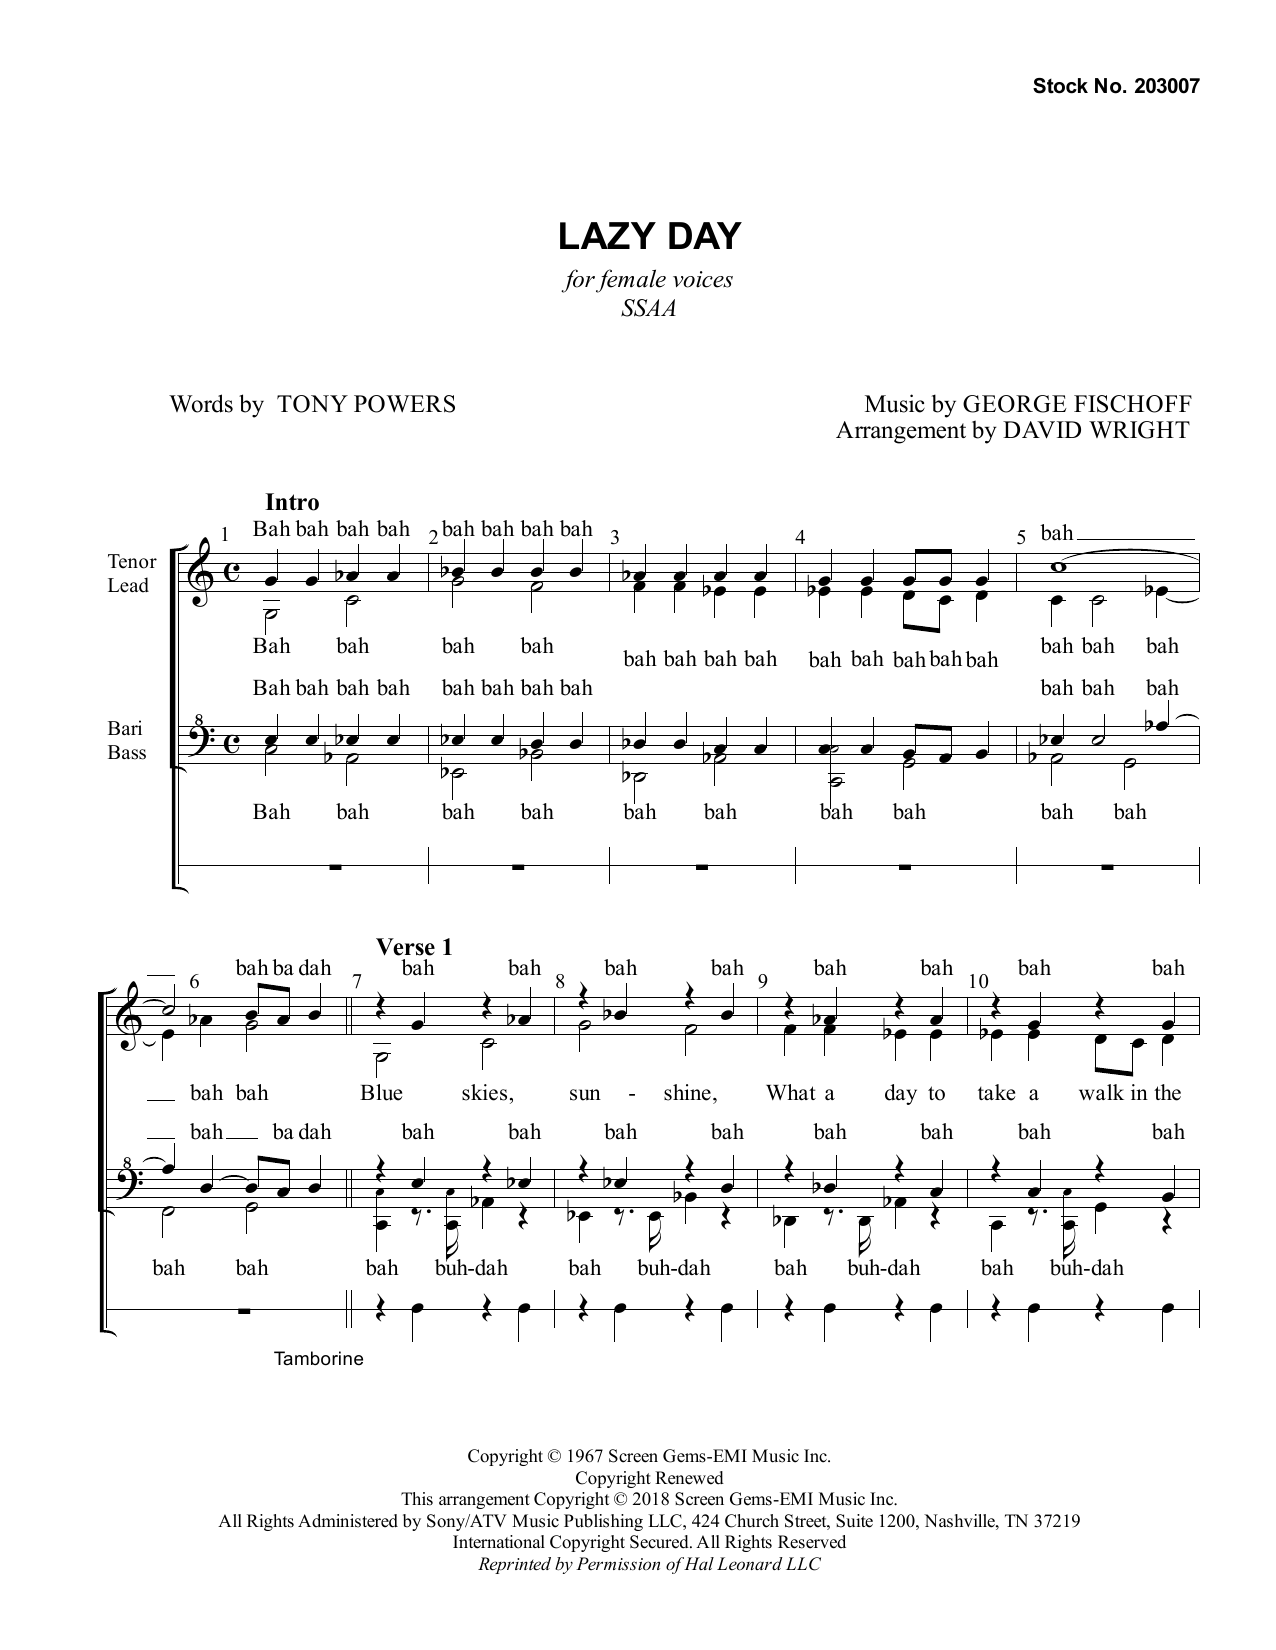 Download The Gas House Gang Lazy Day (arr. David Wright) Sheet Music